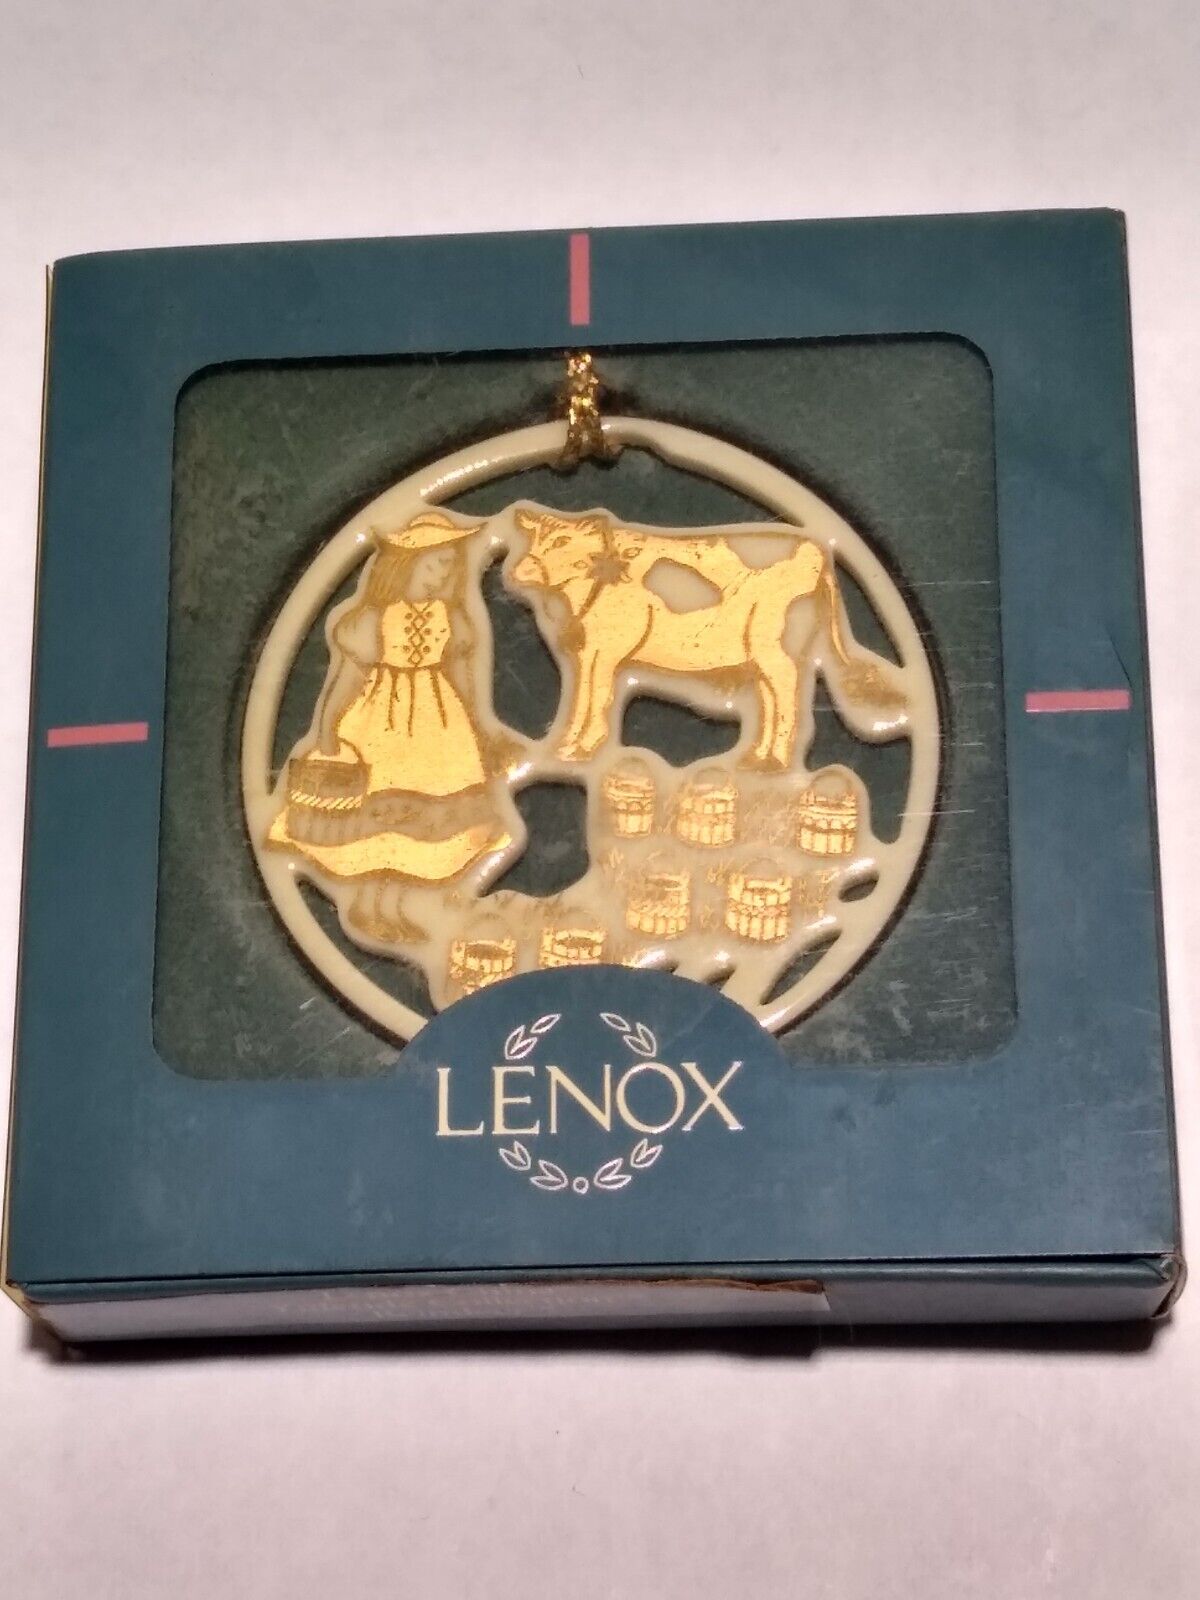 Lenox 8 Eight Maids A Milking 12 Days Of Christmas Ornament